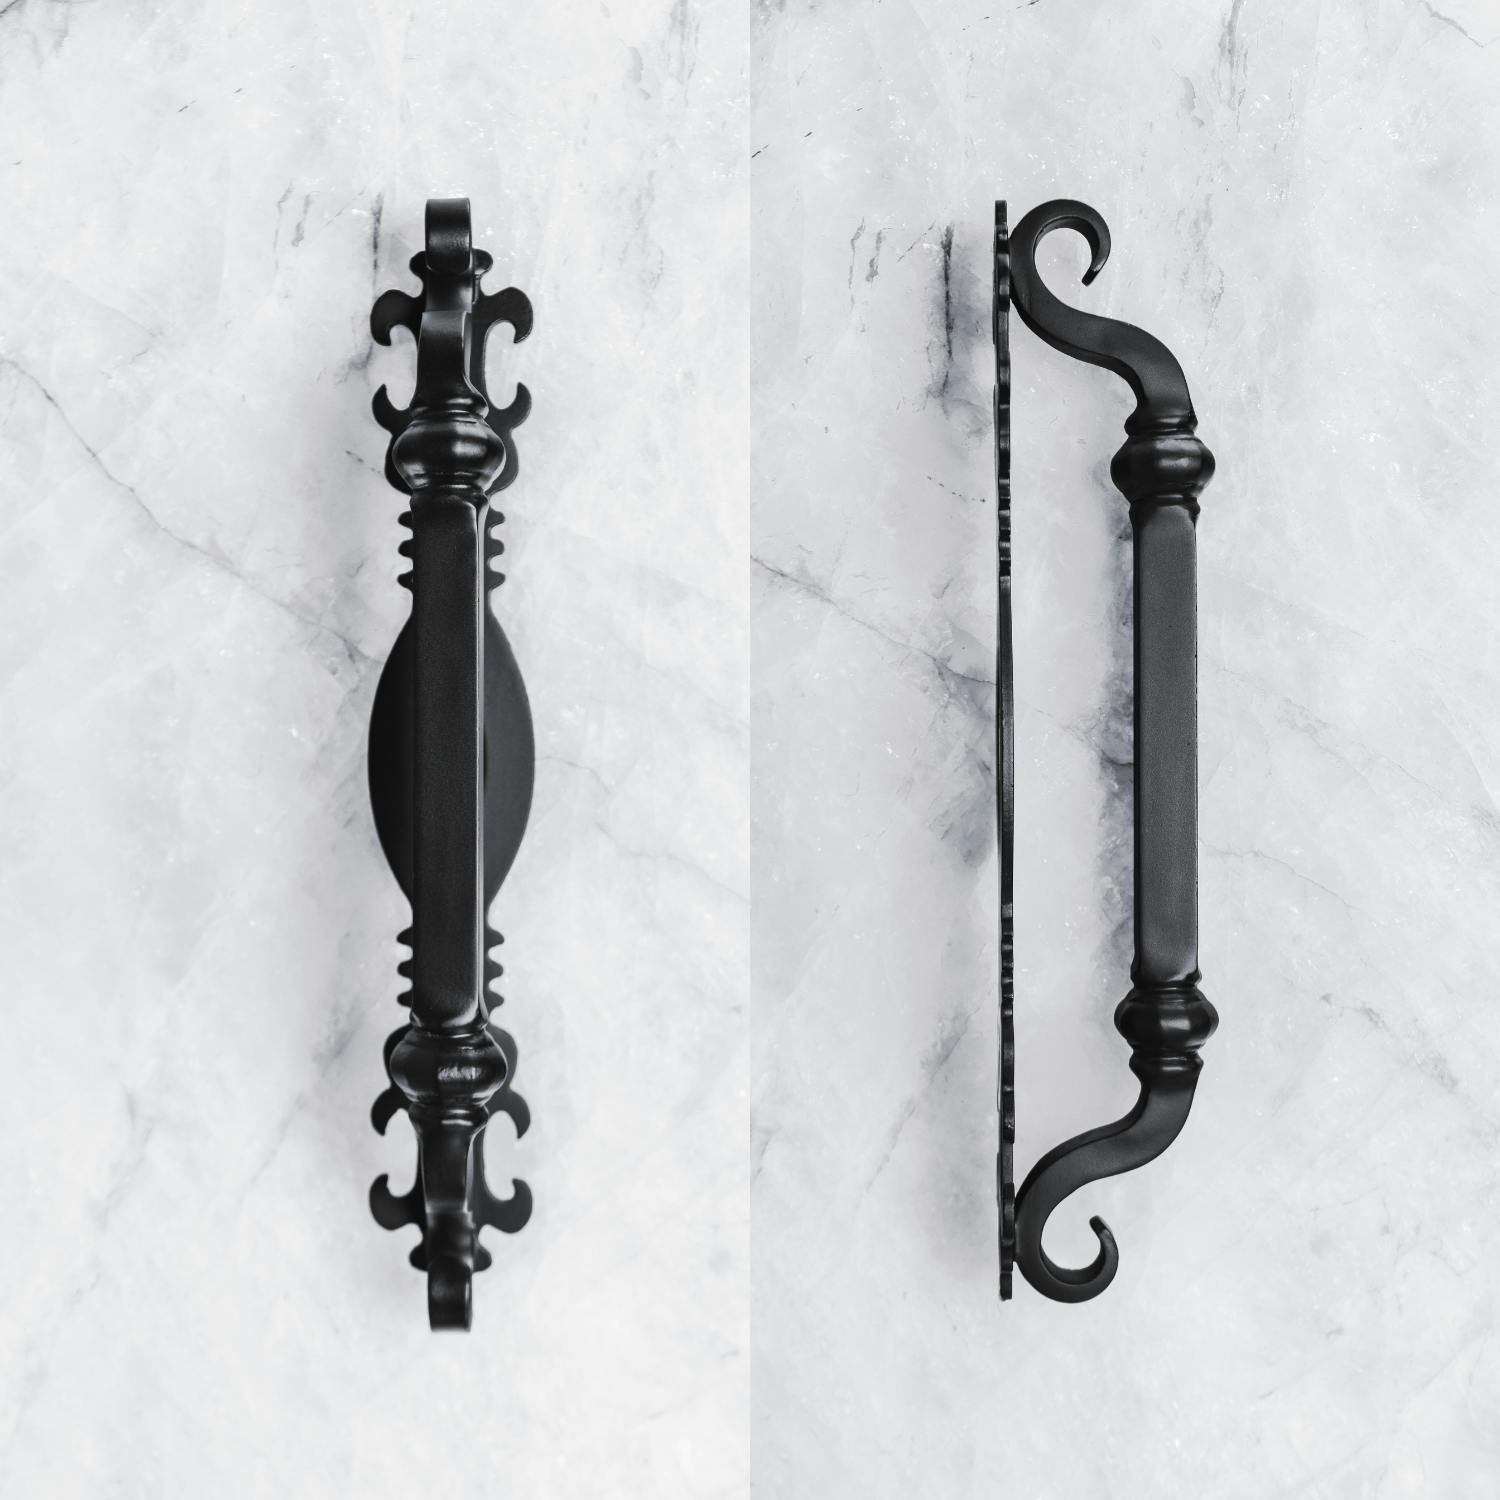 Contemporary iron door handle with ergonomic grip and comfortable touch